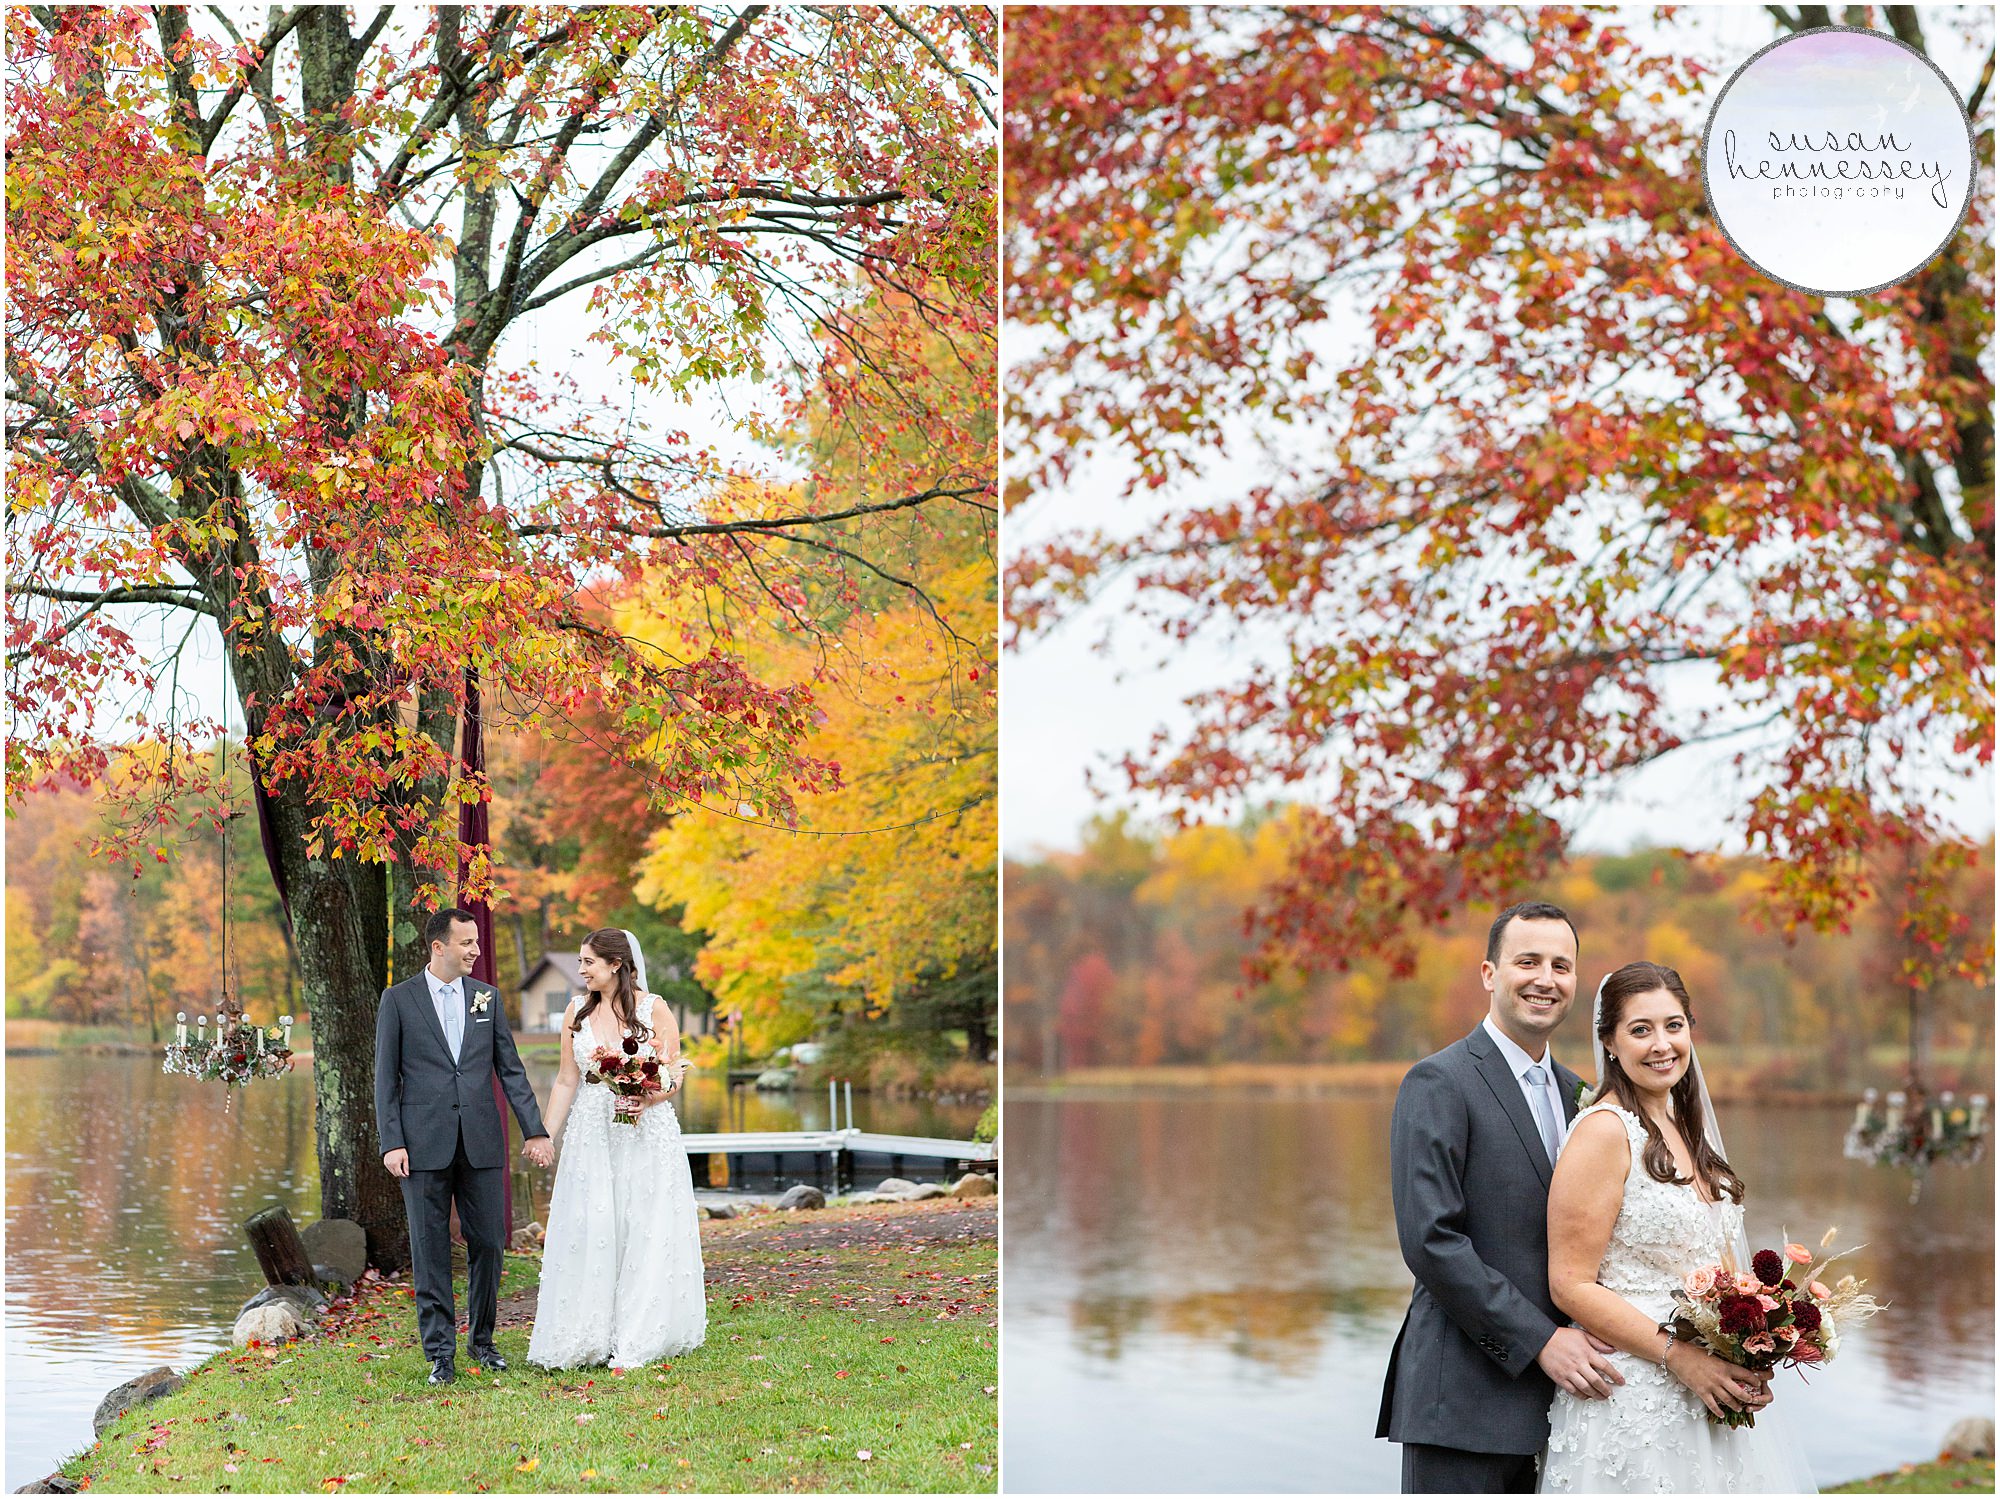 Romantic bride and groom portraits at Andre's Lakeside Dining Microwedding